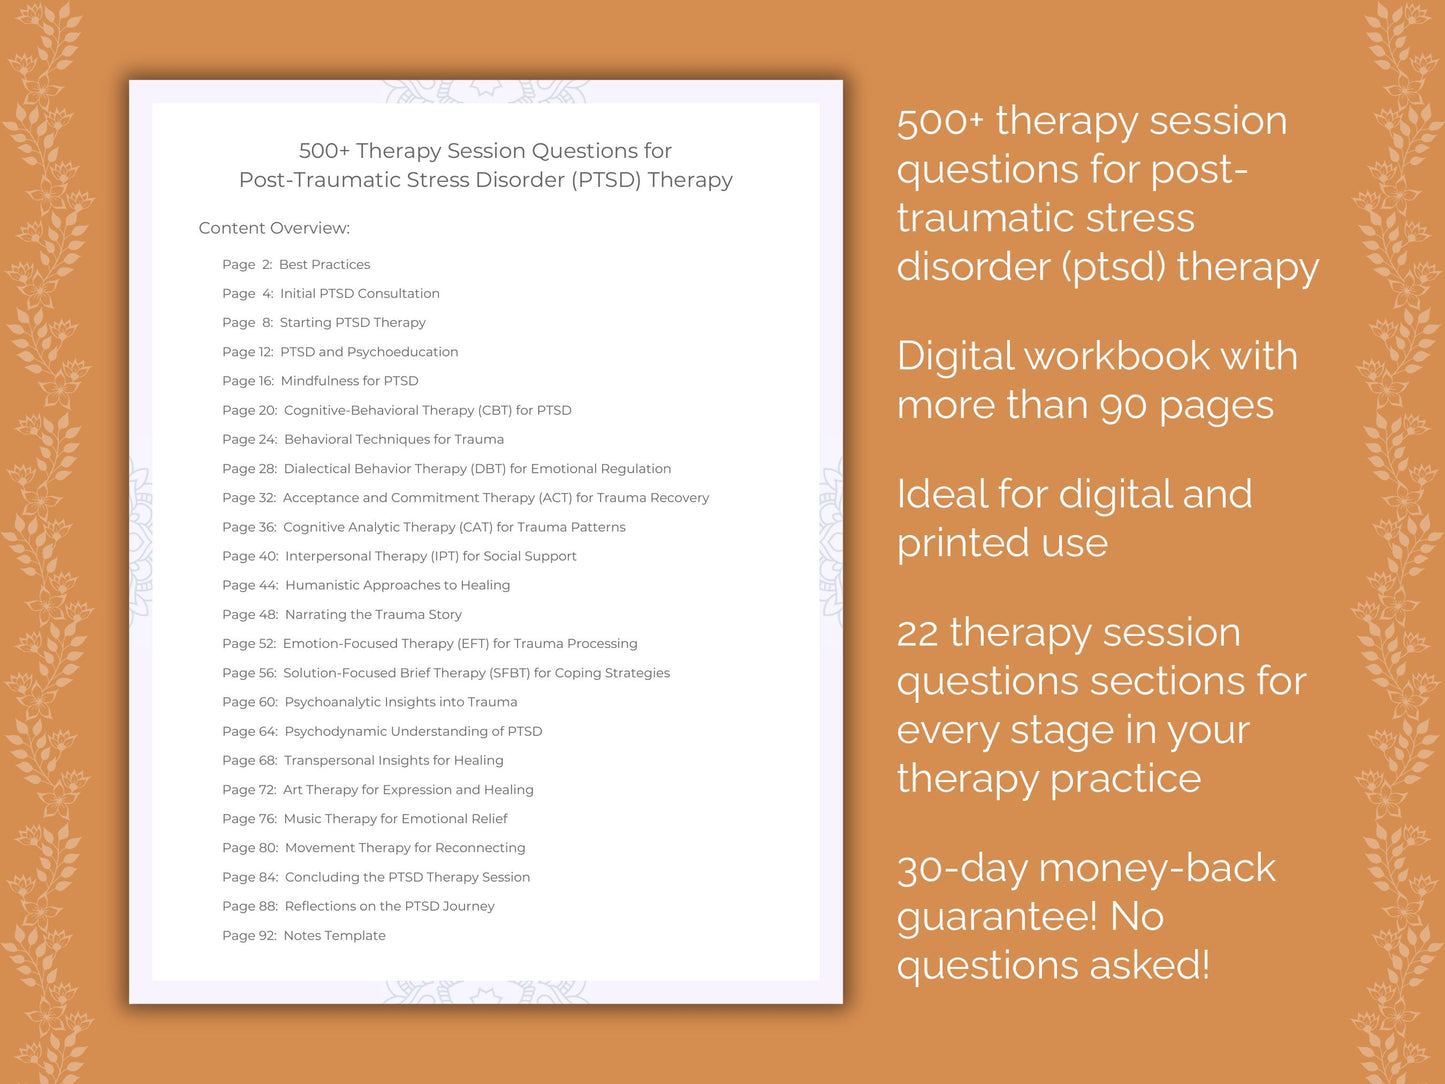 Post-Traumatic Stress Disorder (PTSD) Therapy Session Questions Resource